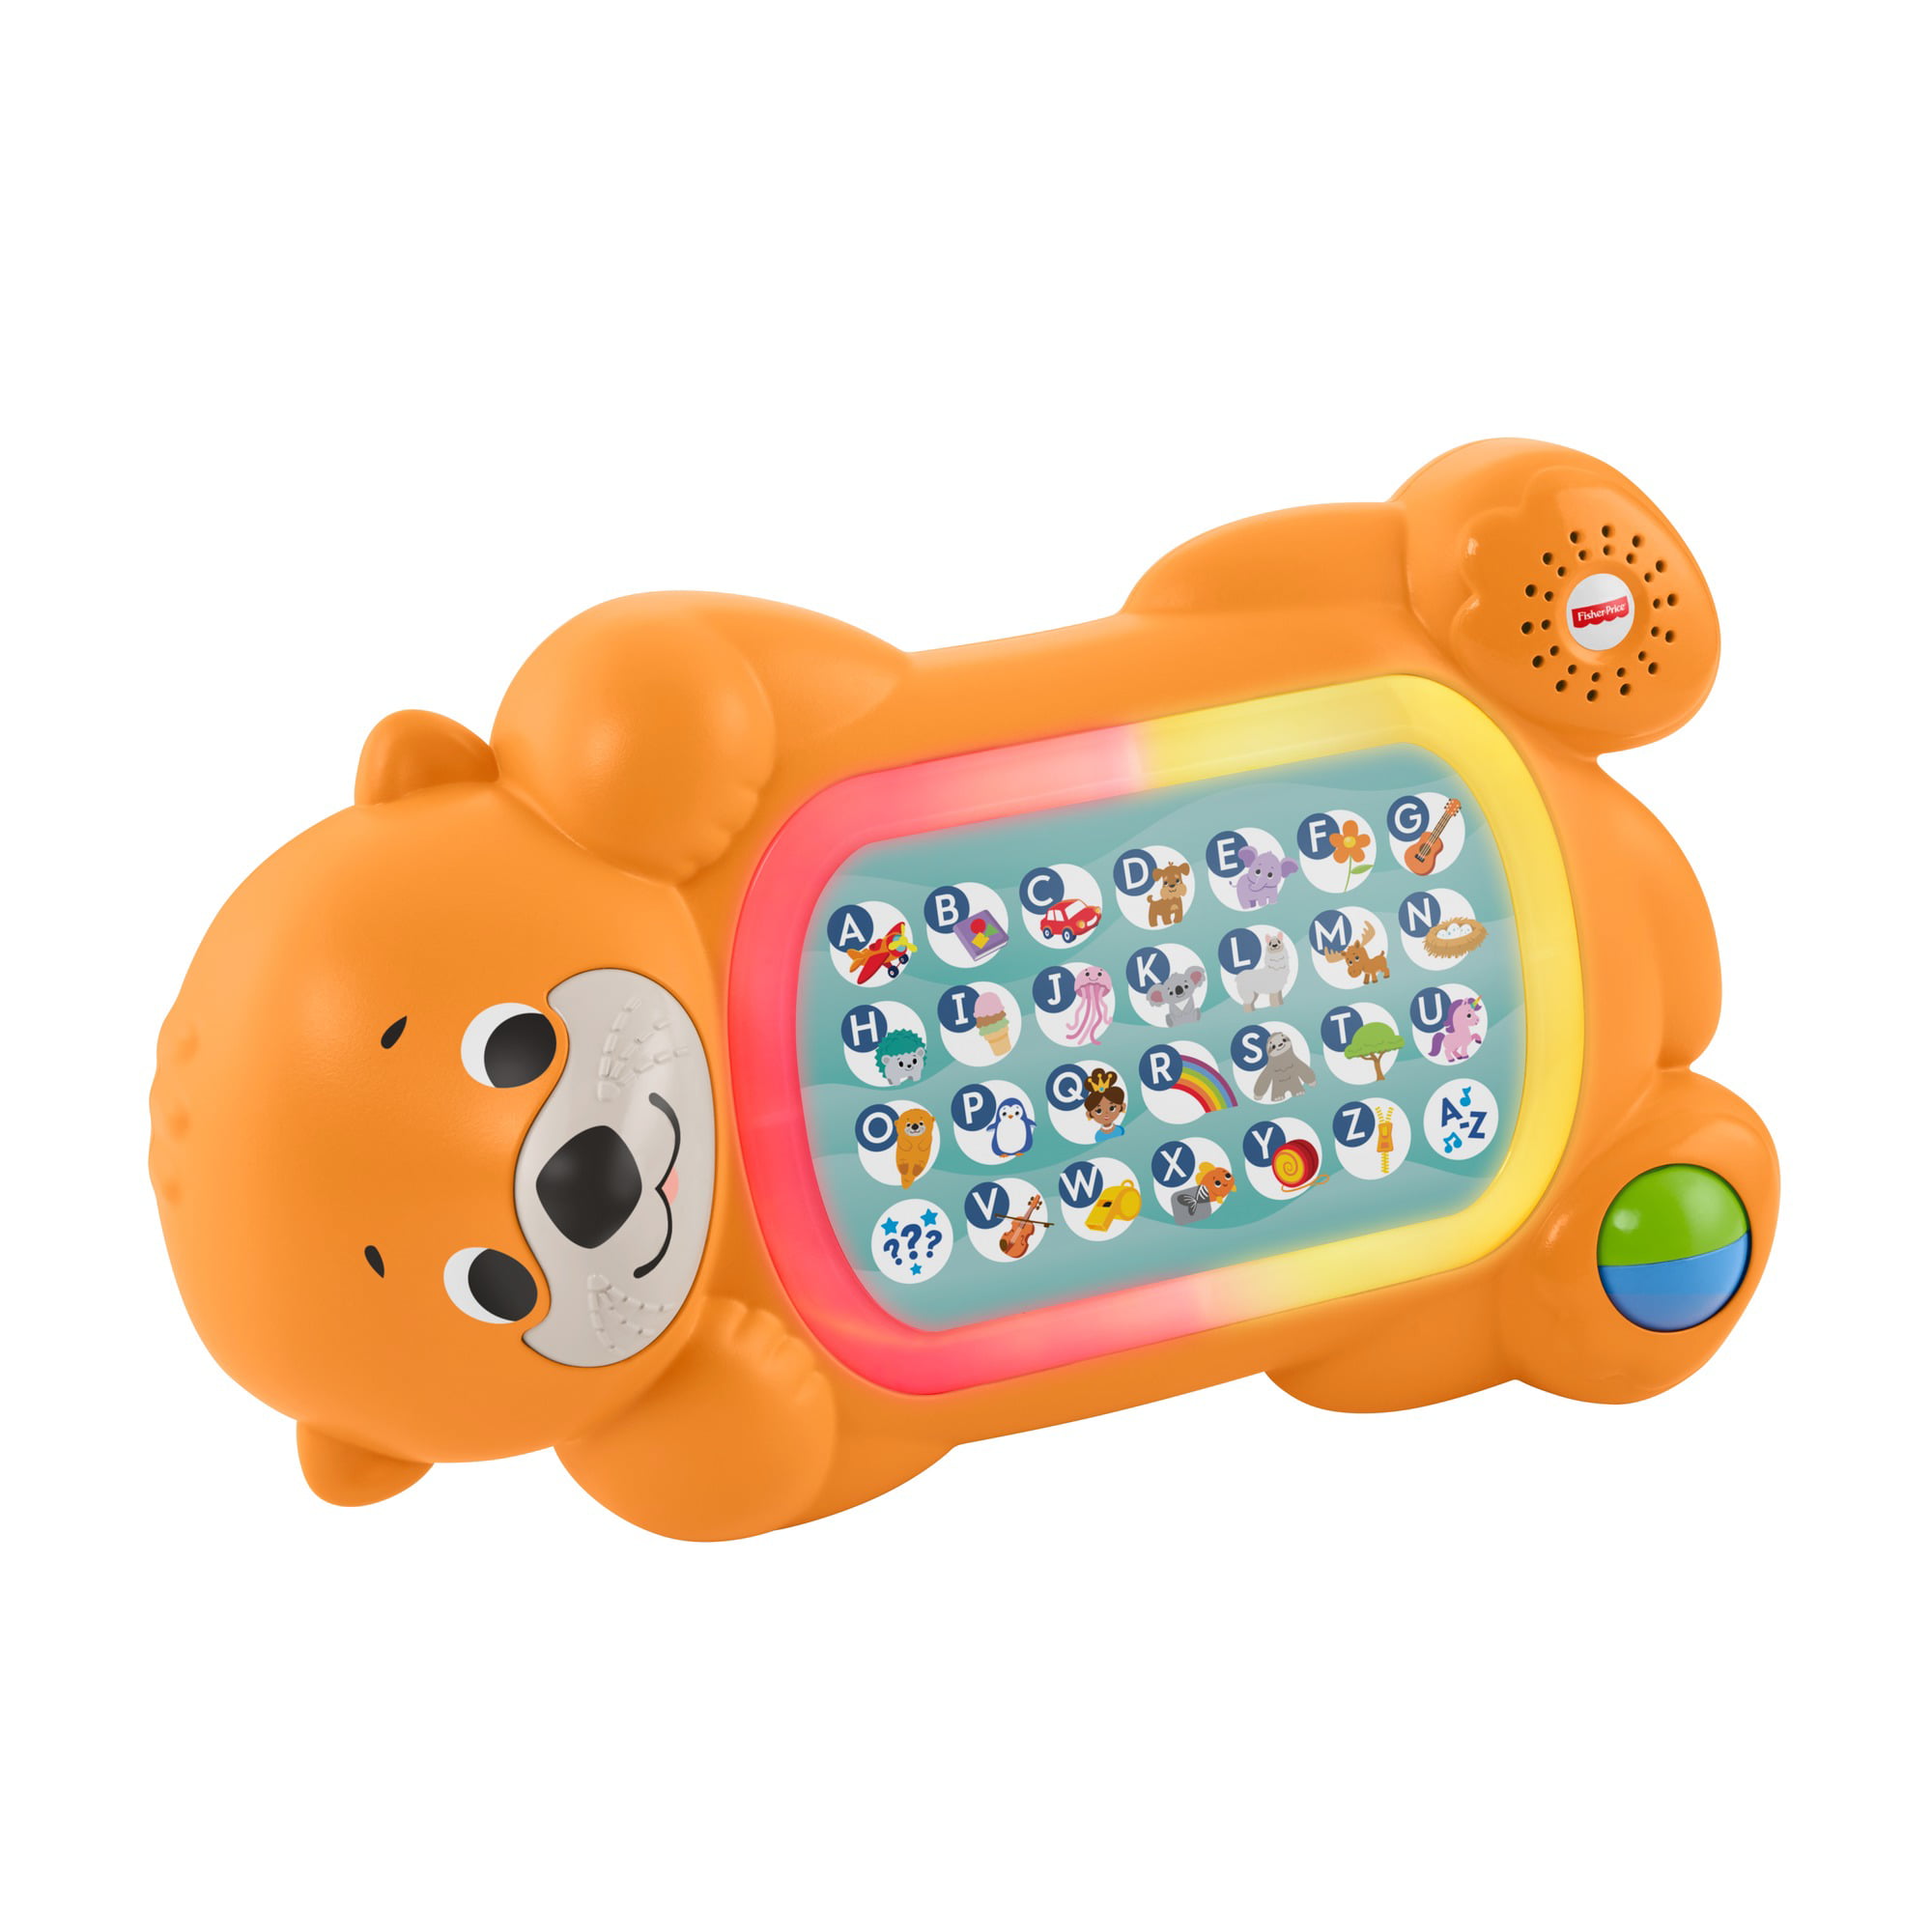 Award Winning Fisher-Price Linkimals A To Z Otter, Interactive Keyboard Baby Toy